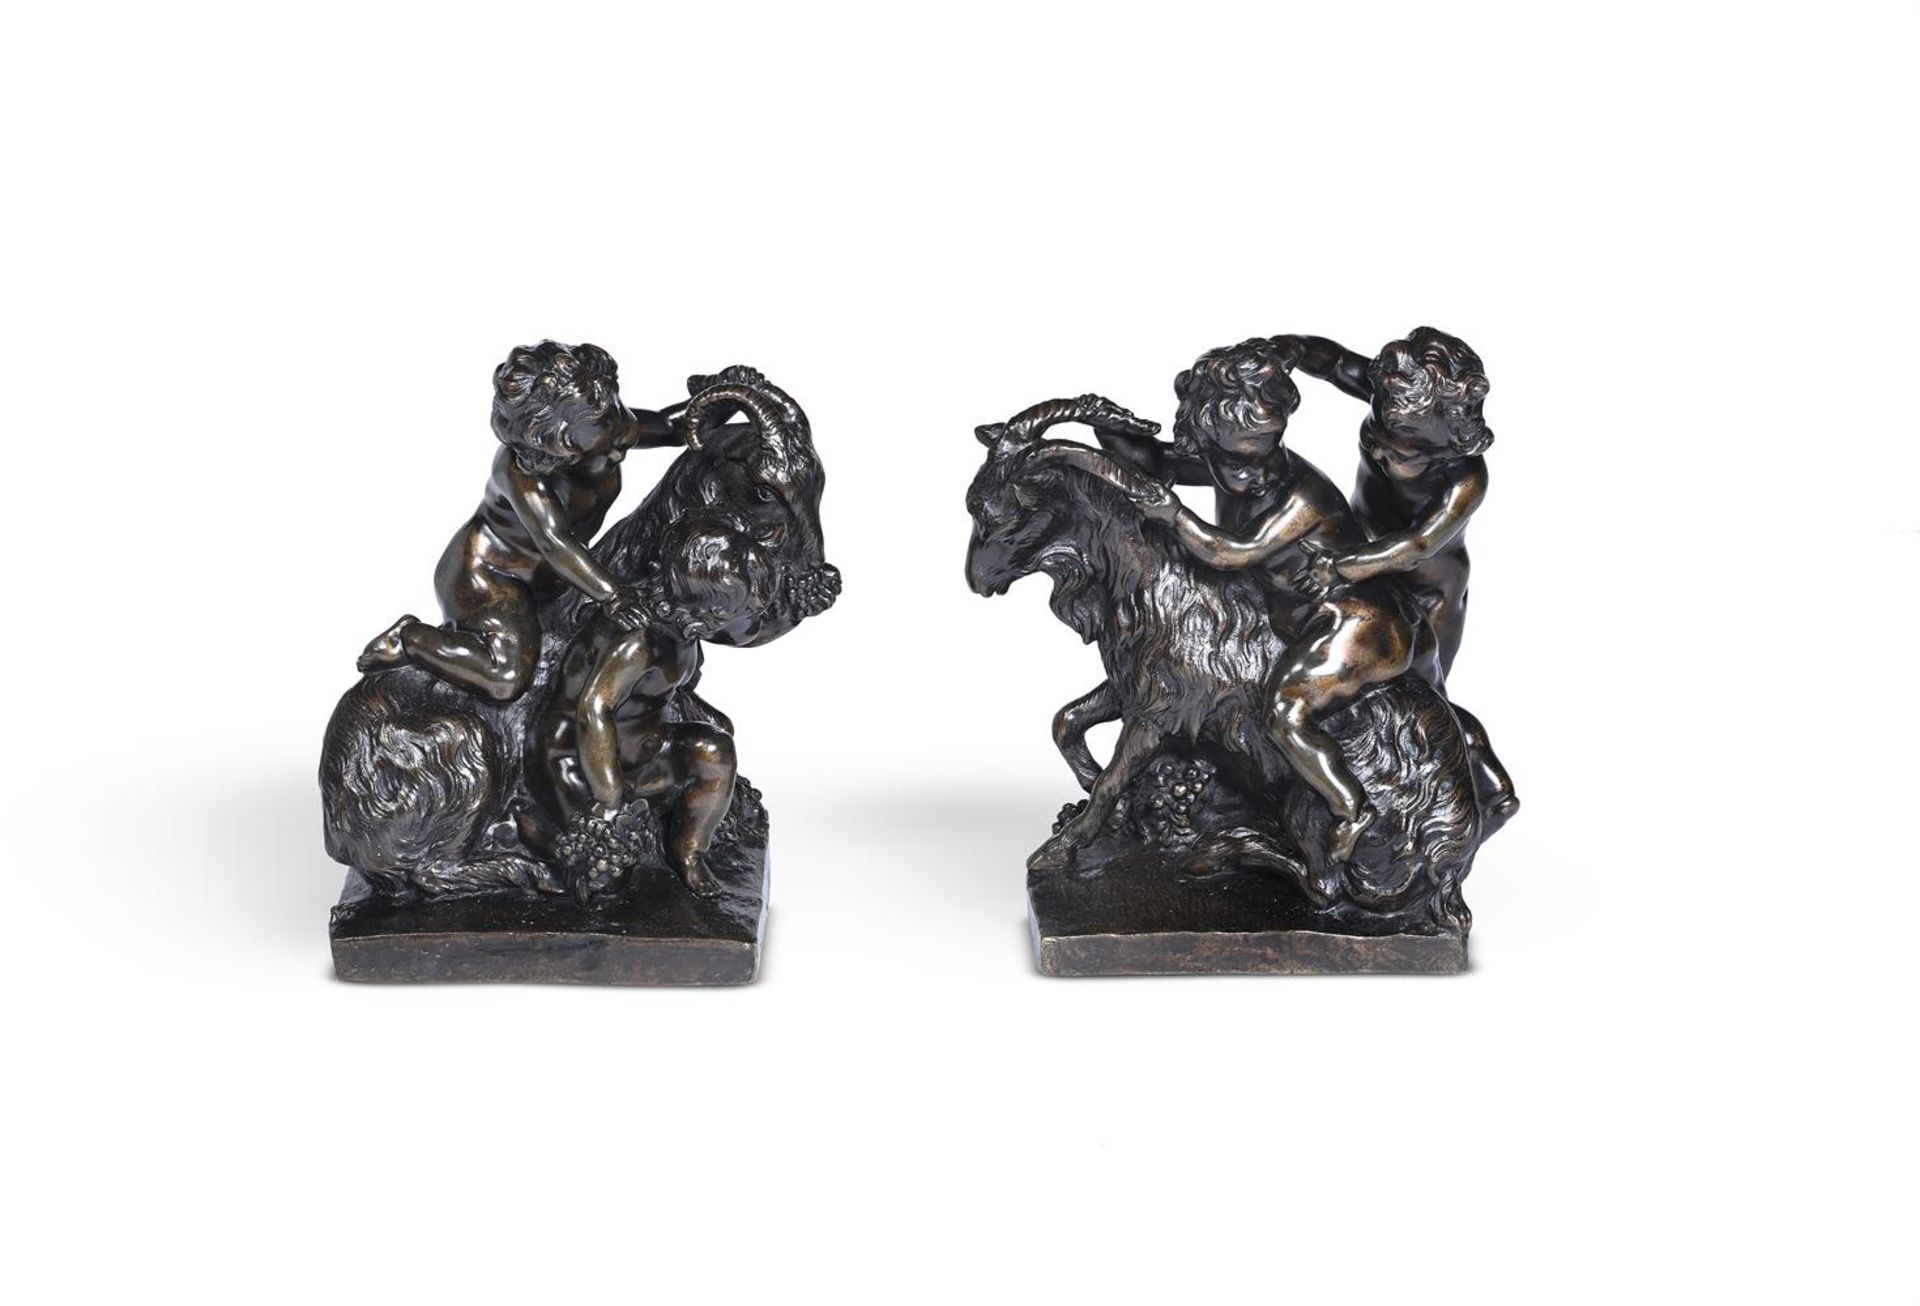 A PAIR OF FRENCH BRONZE CHERUB GROUPS, IN THE MANNER OF CLODION, 19TH CENTURY - Image 2 of 2